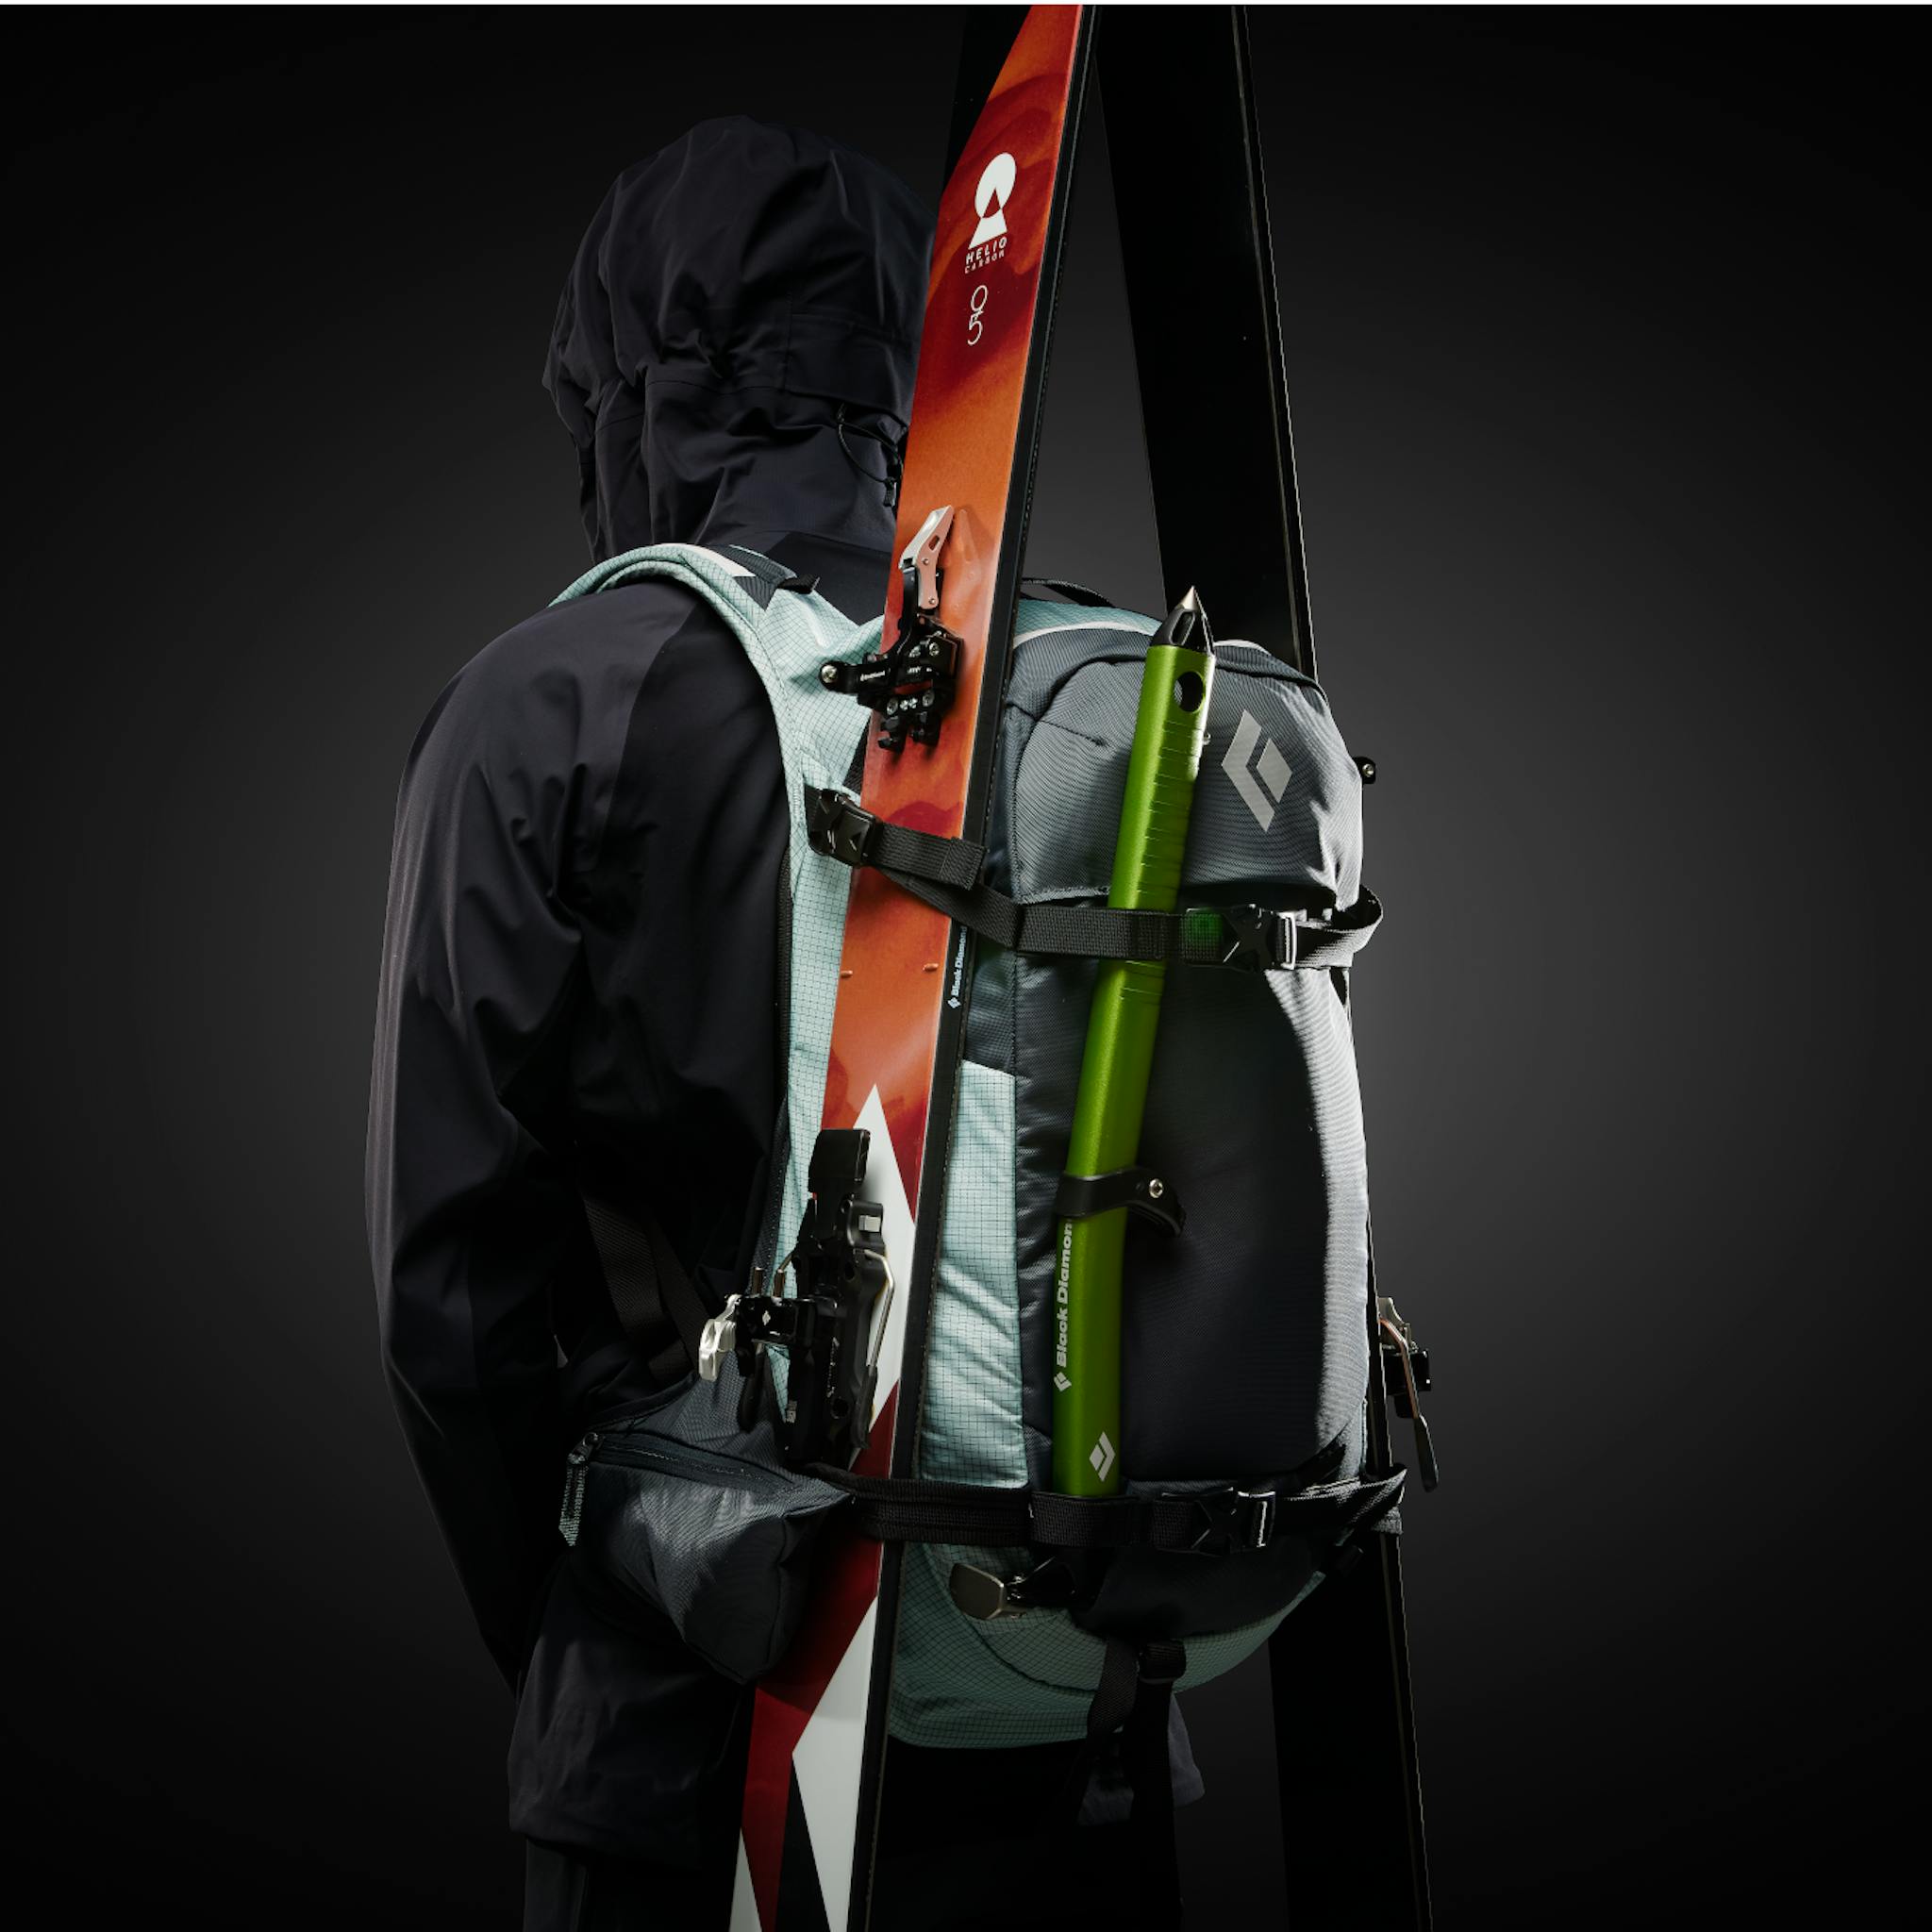 Dawn Patrol 32 backpack with Skis and Piolet attached